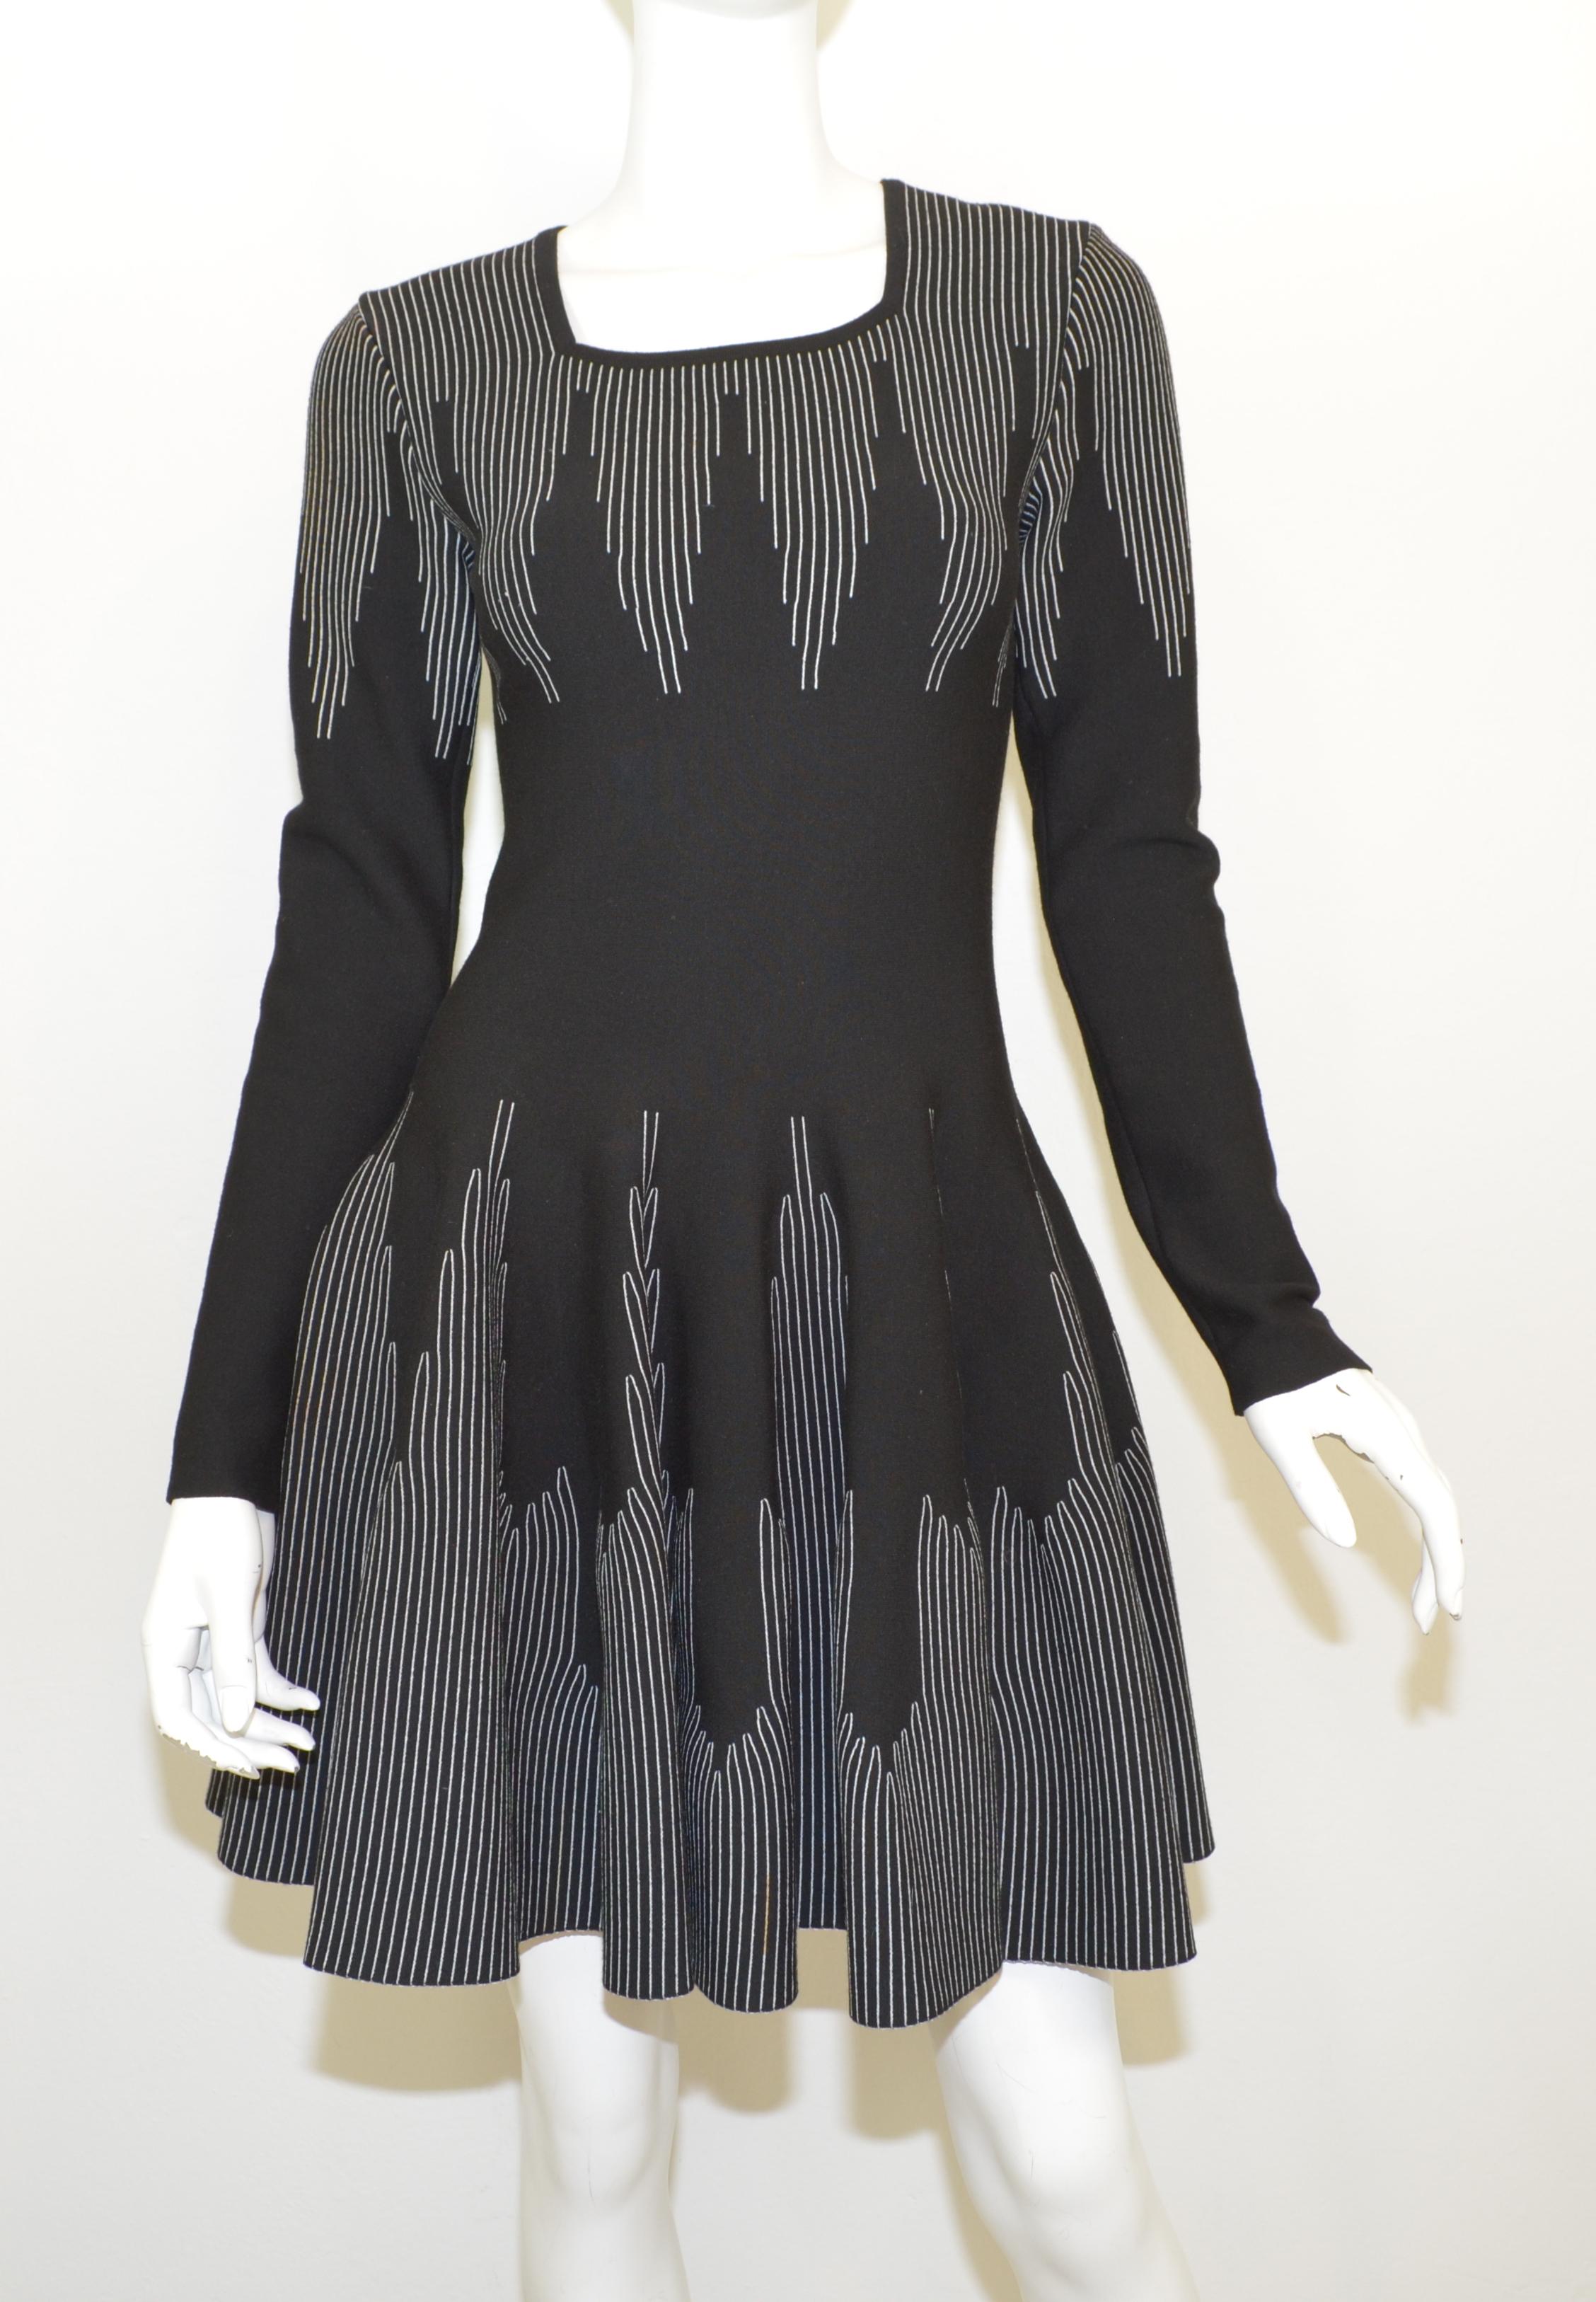 Alaia knitted fit and flare knitted dress is featured in black with a white striped/chevron pattern. Dress has a back zipper closure. Made in Italy, size 38. 

Measurements:
Bust 31”
Waist 26”
Hips 38”
Length 34” 
Sleeves 24”